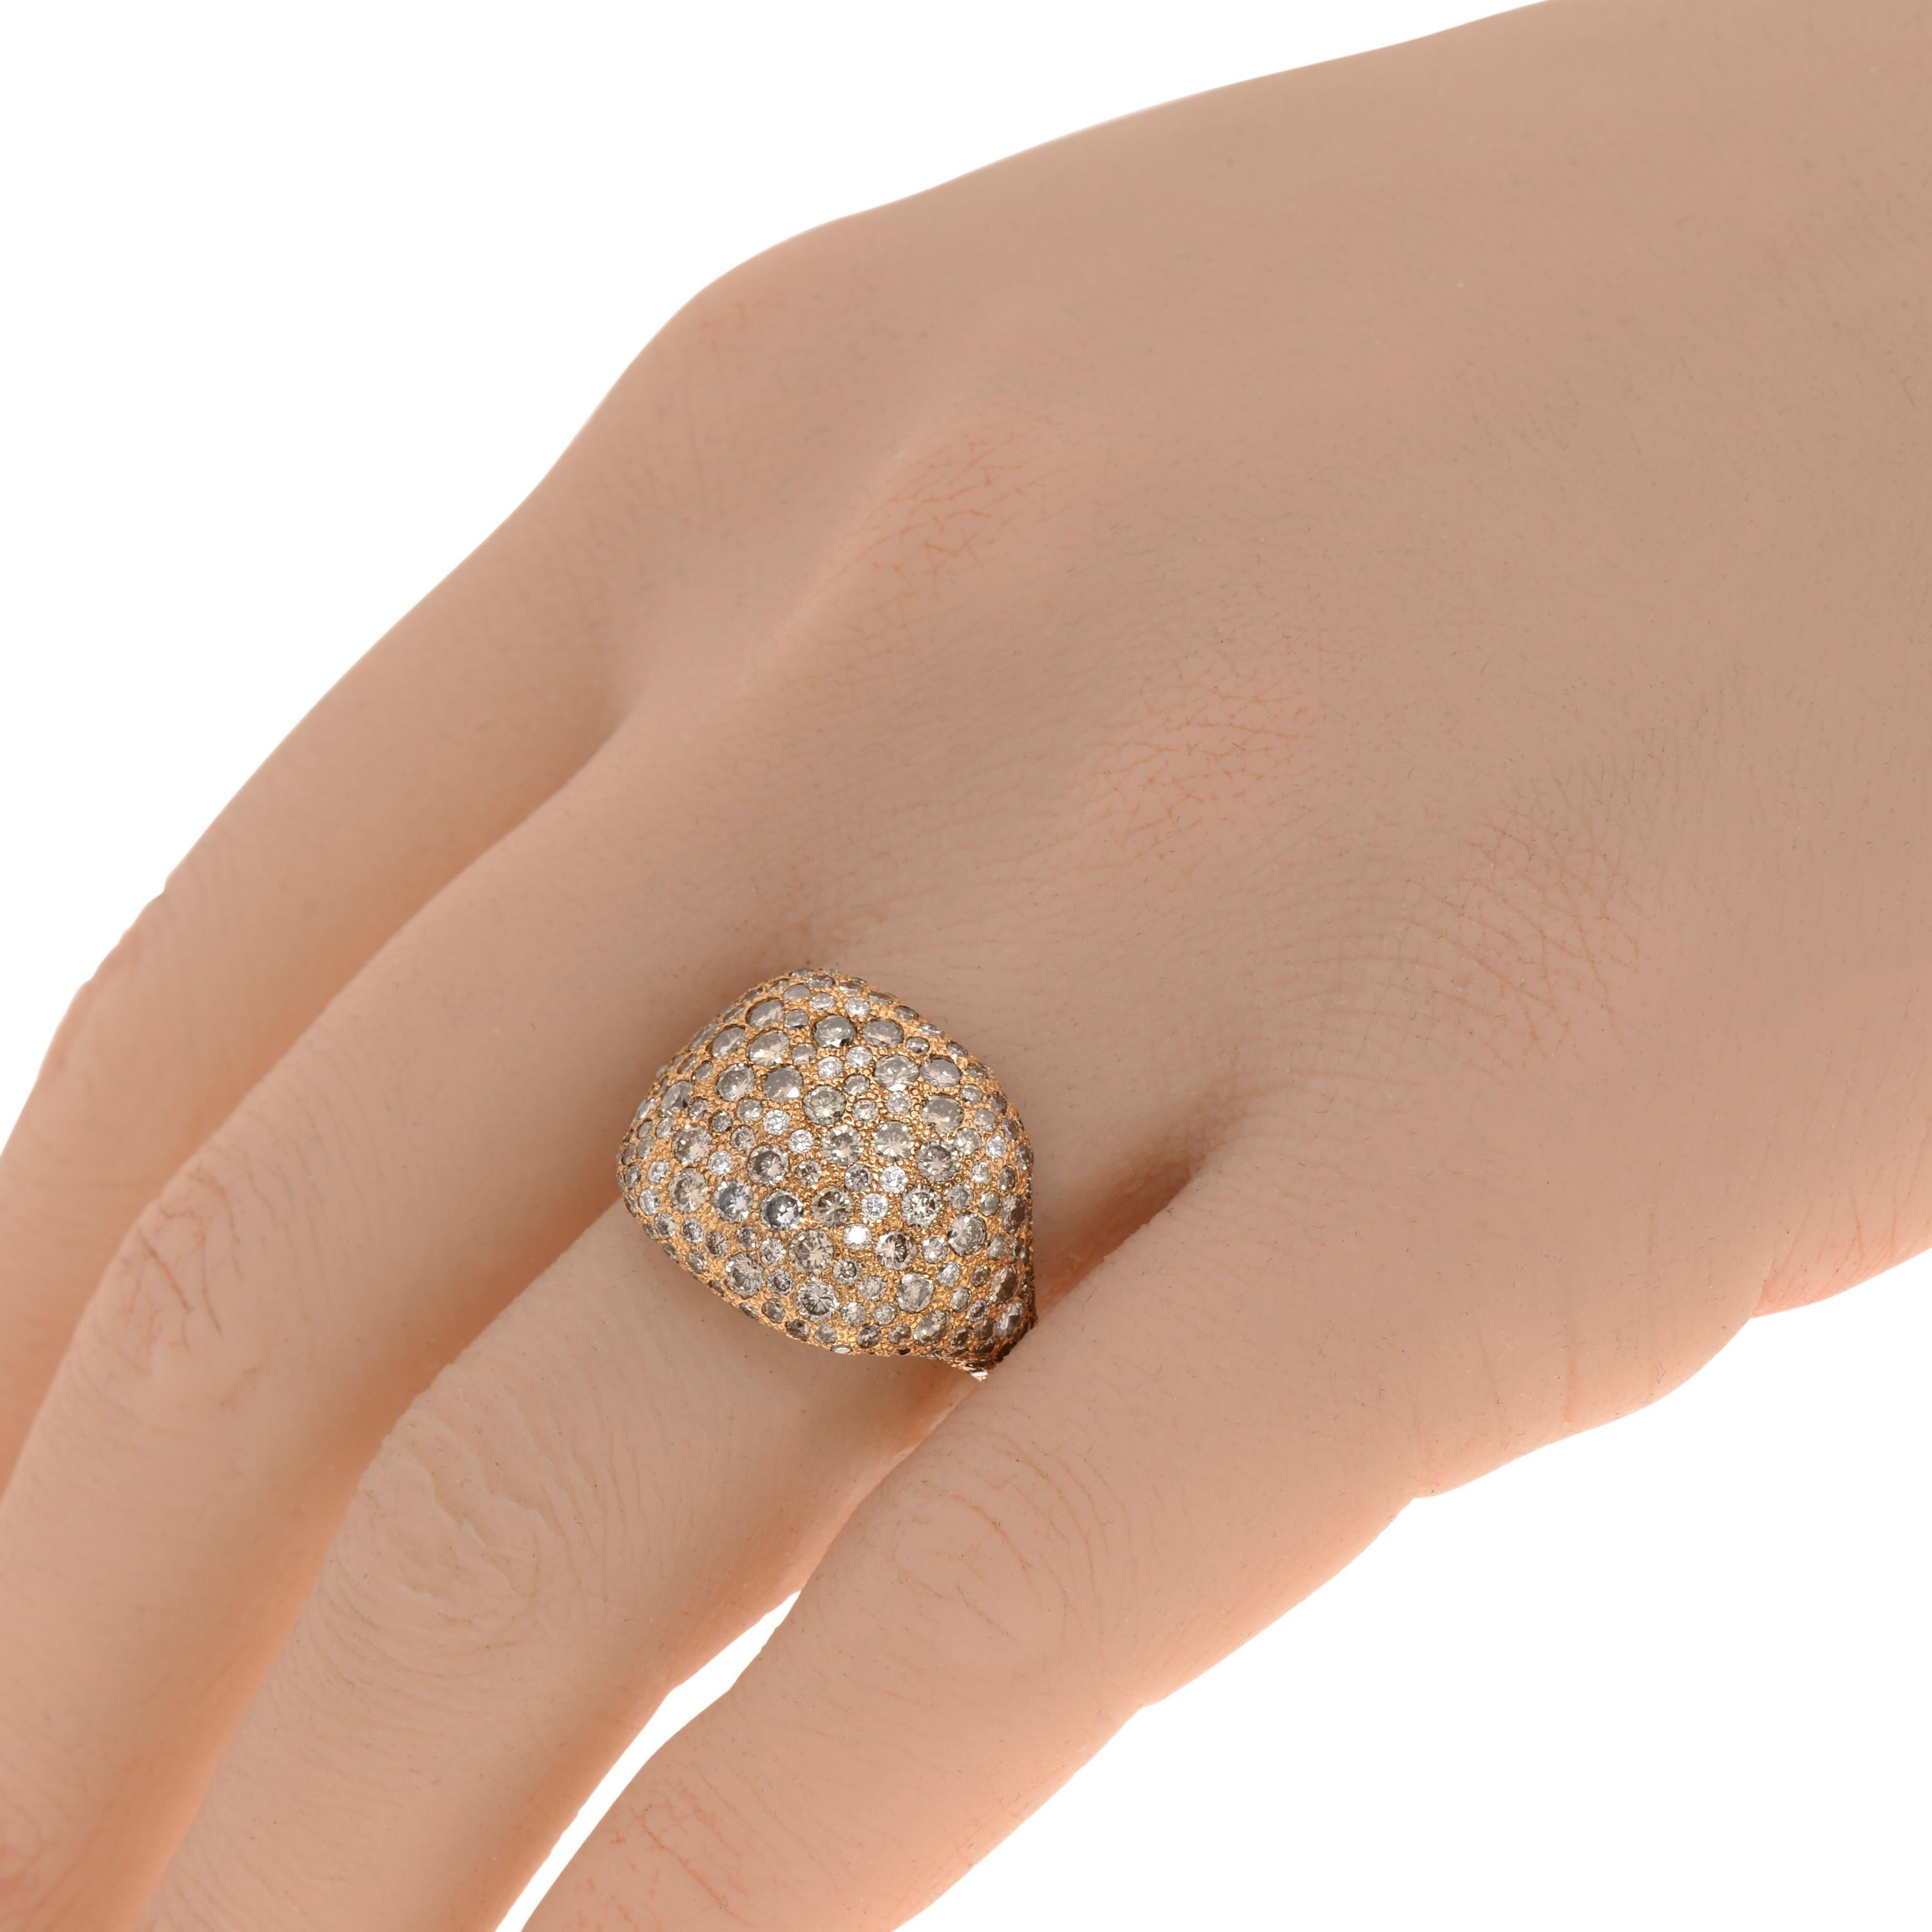 This sparkling Salvini 18K rose gold Signet ring features glittering 2.83ct. tw. round brilliant diamonds. Diamond clarity: VS/SI. Diamond color: G-H. The ring size is 6.75 (53.8). The band width is 2.4mm. The weight is 7.4g.
